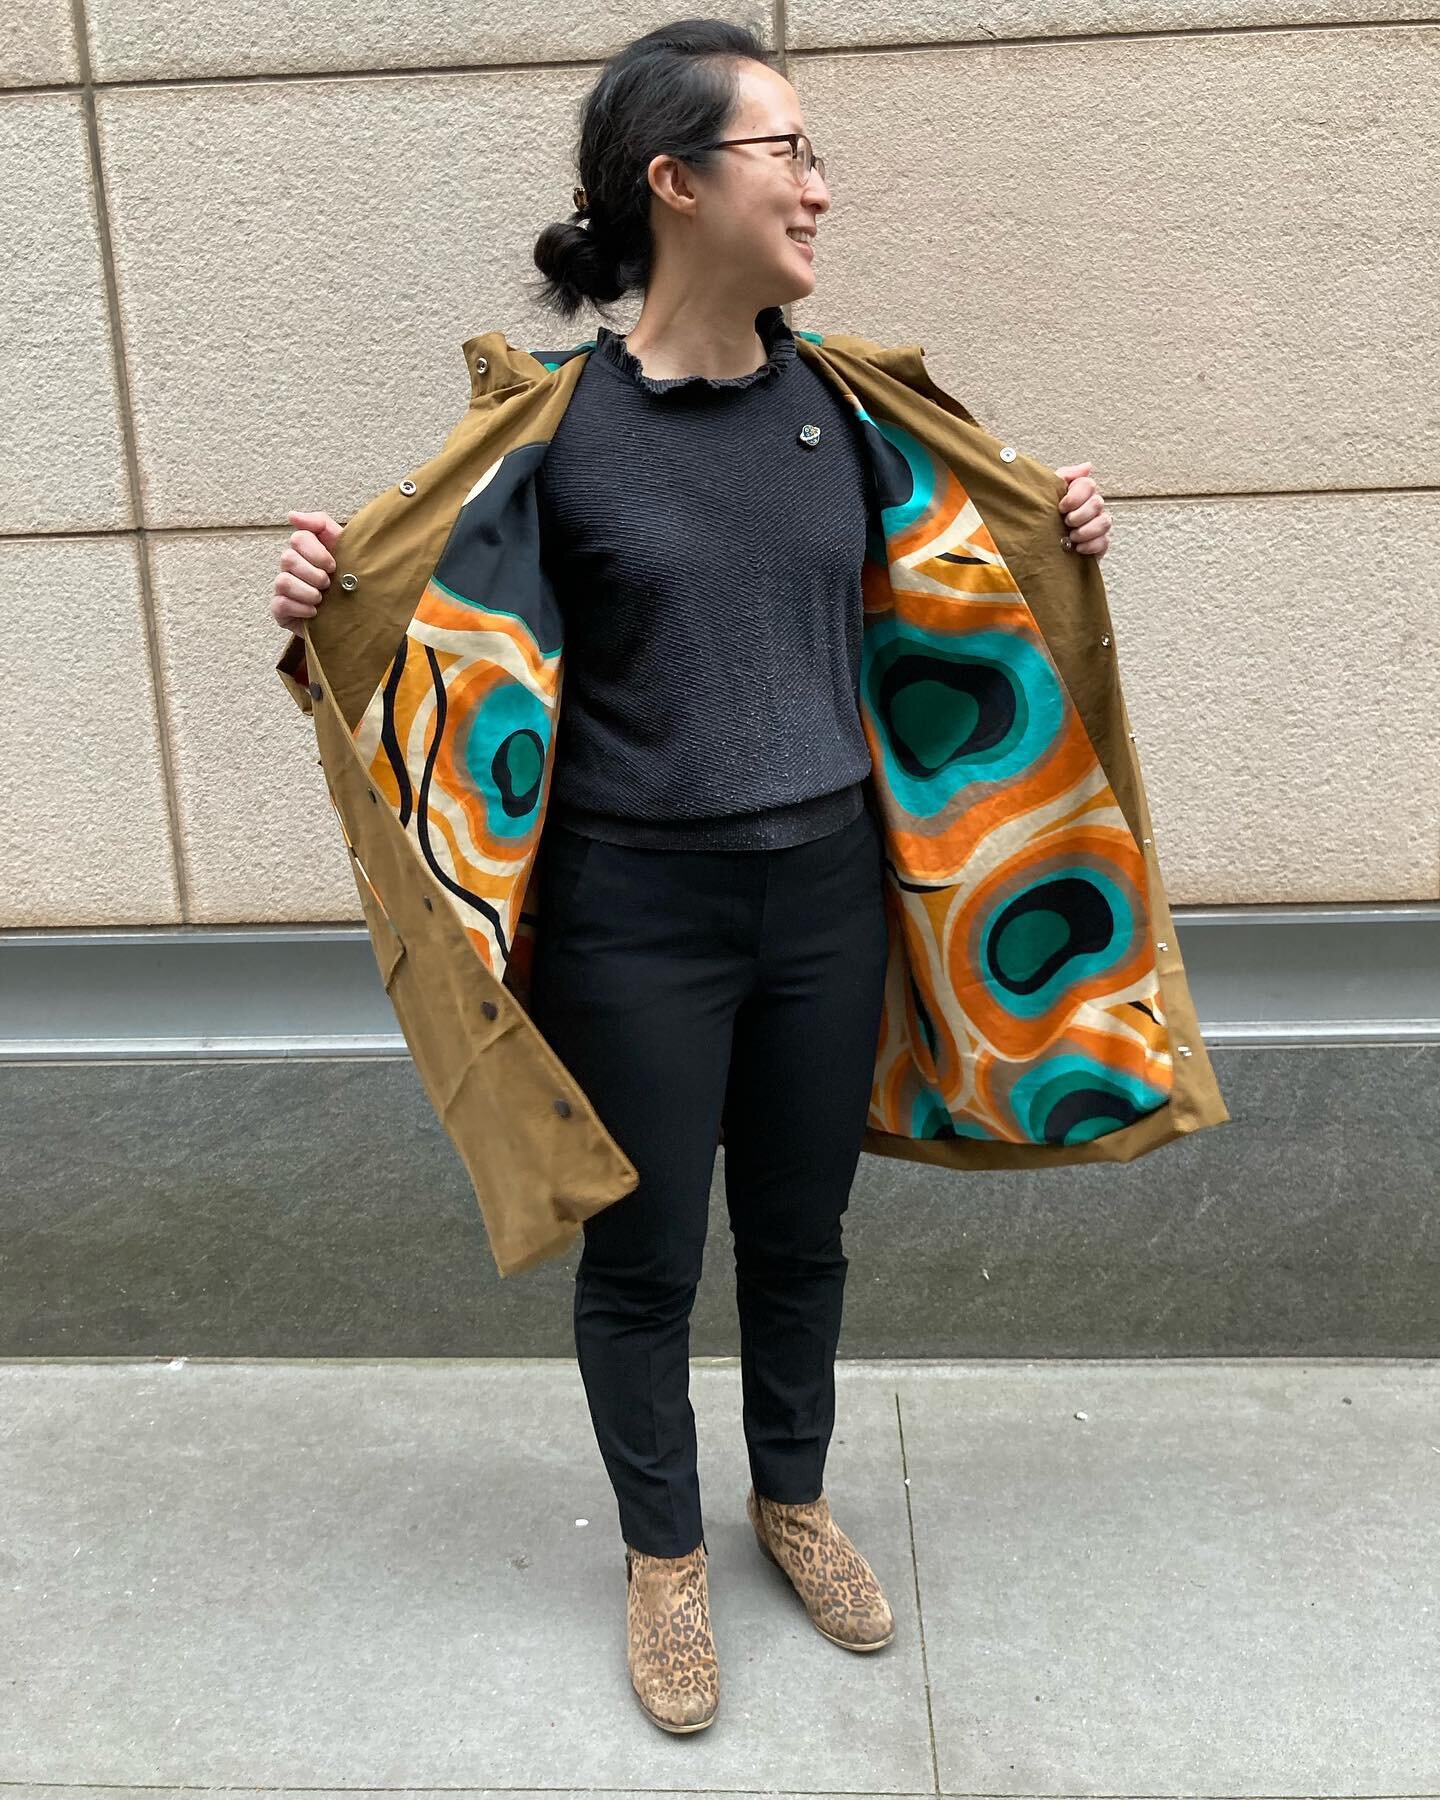 Here&rsquo;s a raincoat that I made in the spring! The sewing pattern is the Seamwork Lou raincoat. 

I wanted to sew an oversized raincoat to wear over chunky sweaters. I like to knit my own sweaters, but I still can&rsquo;t figure out knitting gaug